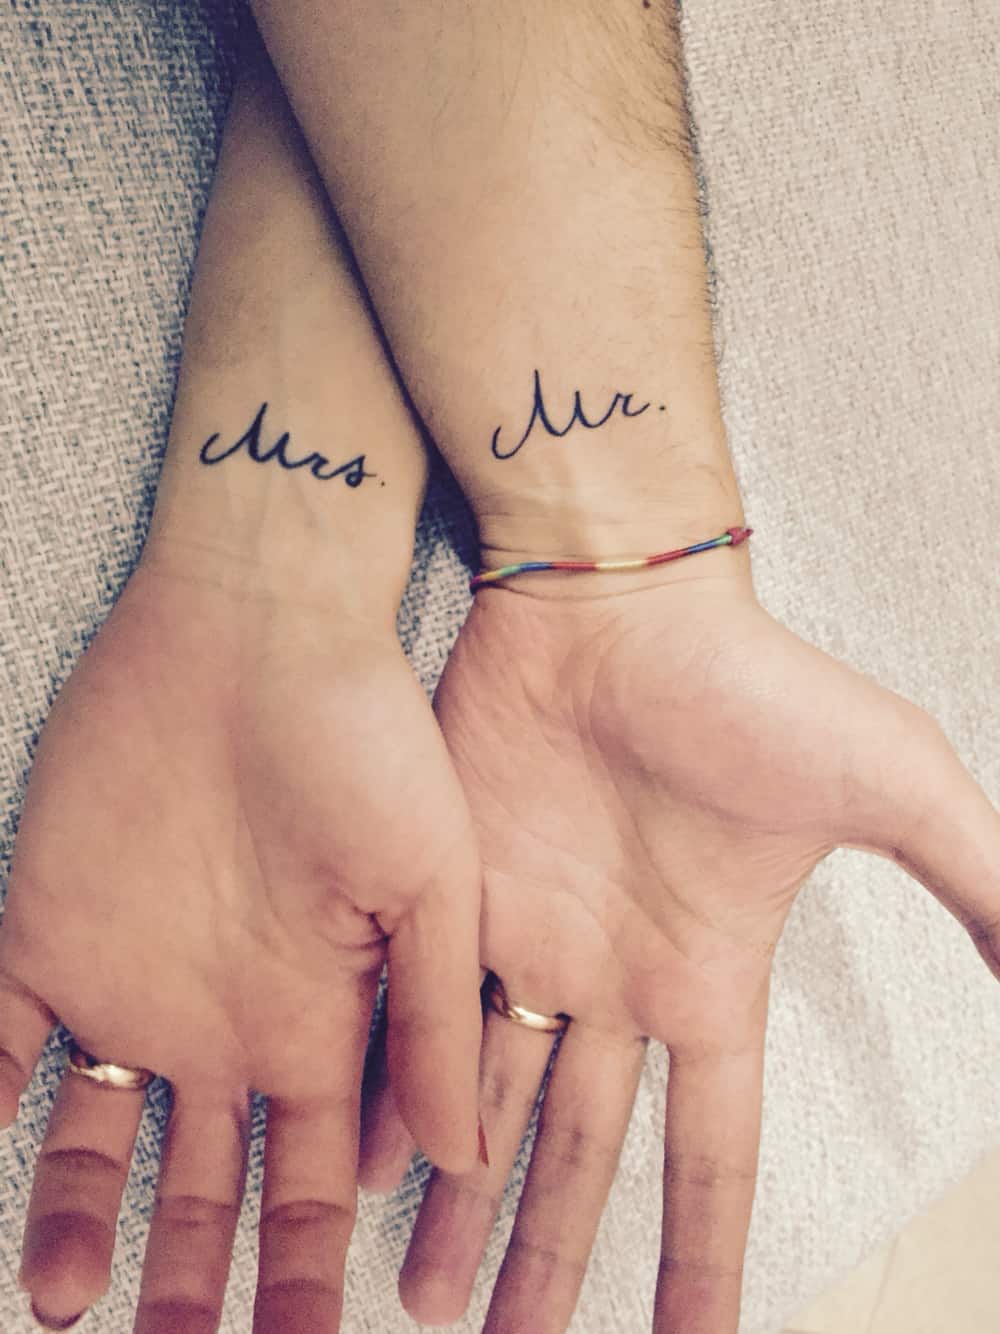 16 Great Wedding Tattoos to Commemorate Your Big Day With